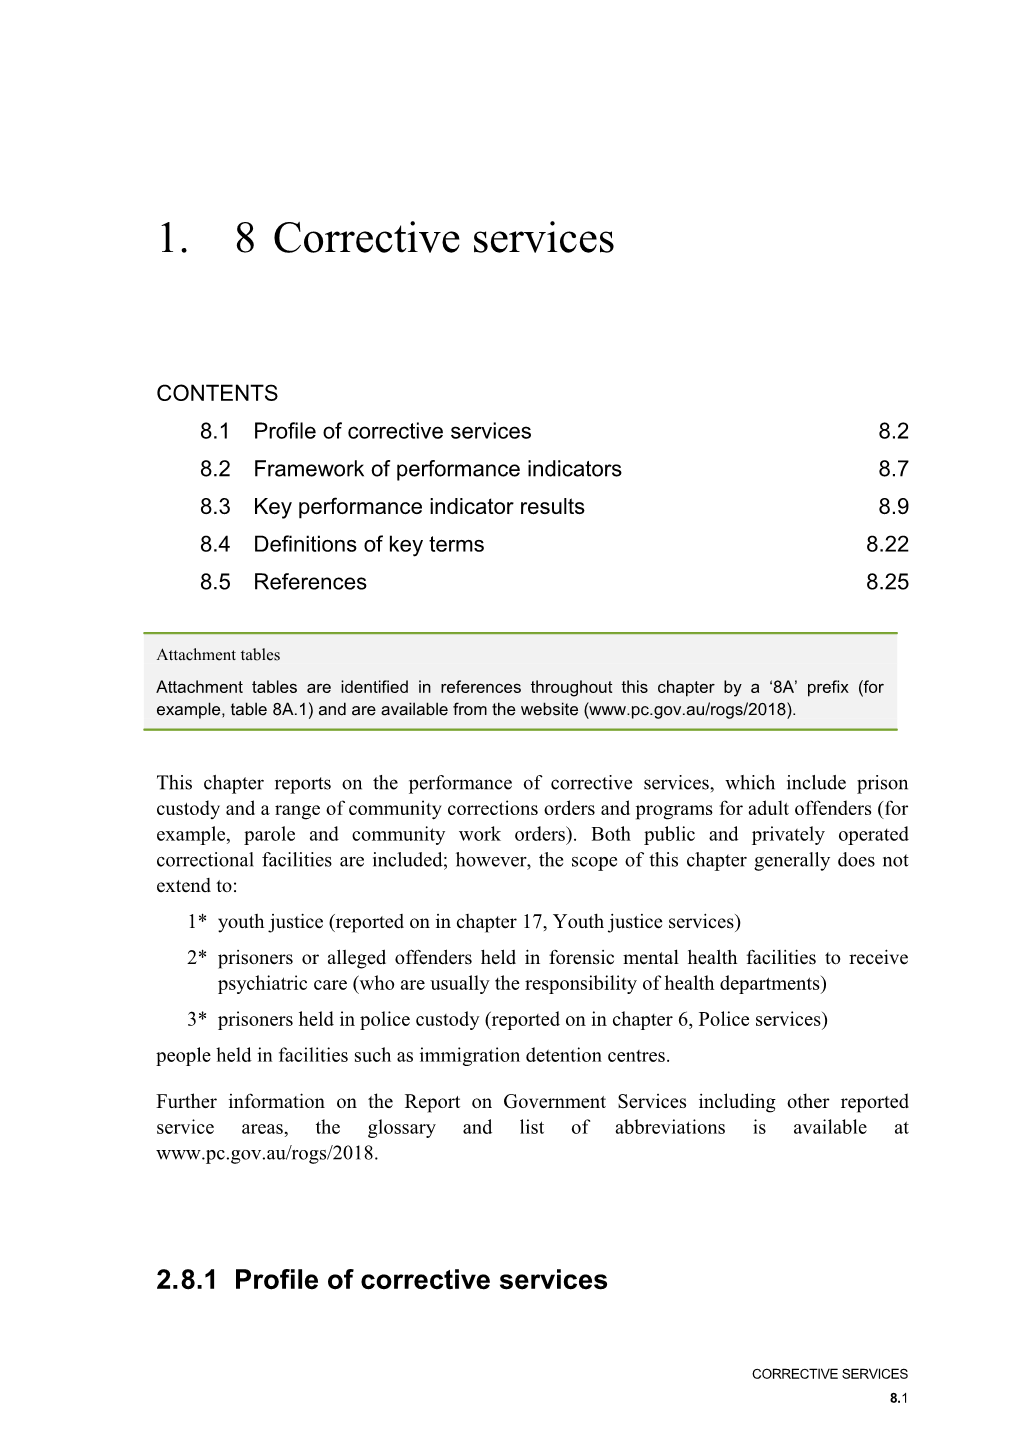 Chapter 8 Corrective Services - Report on Government Services 2018